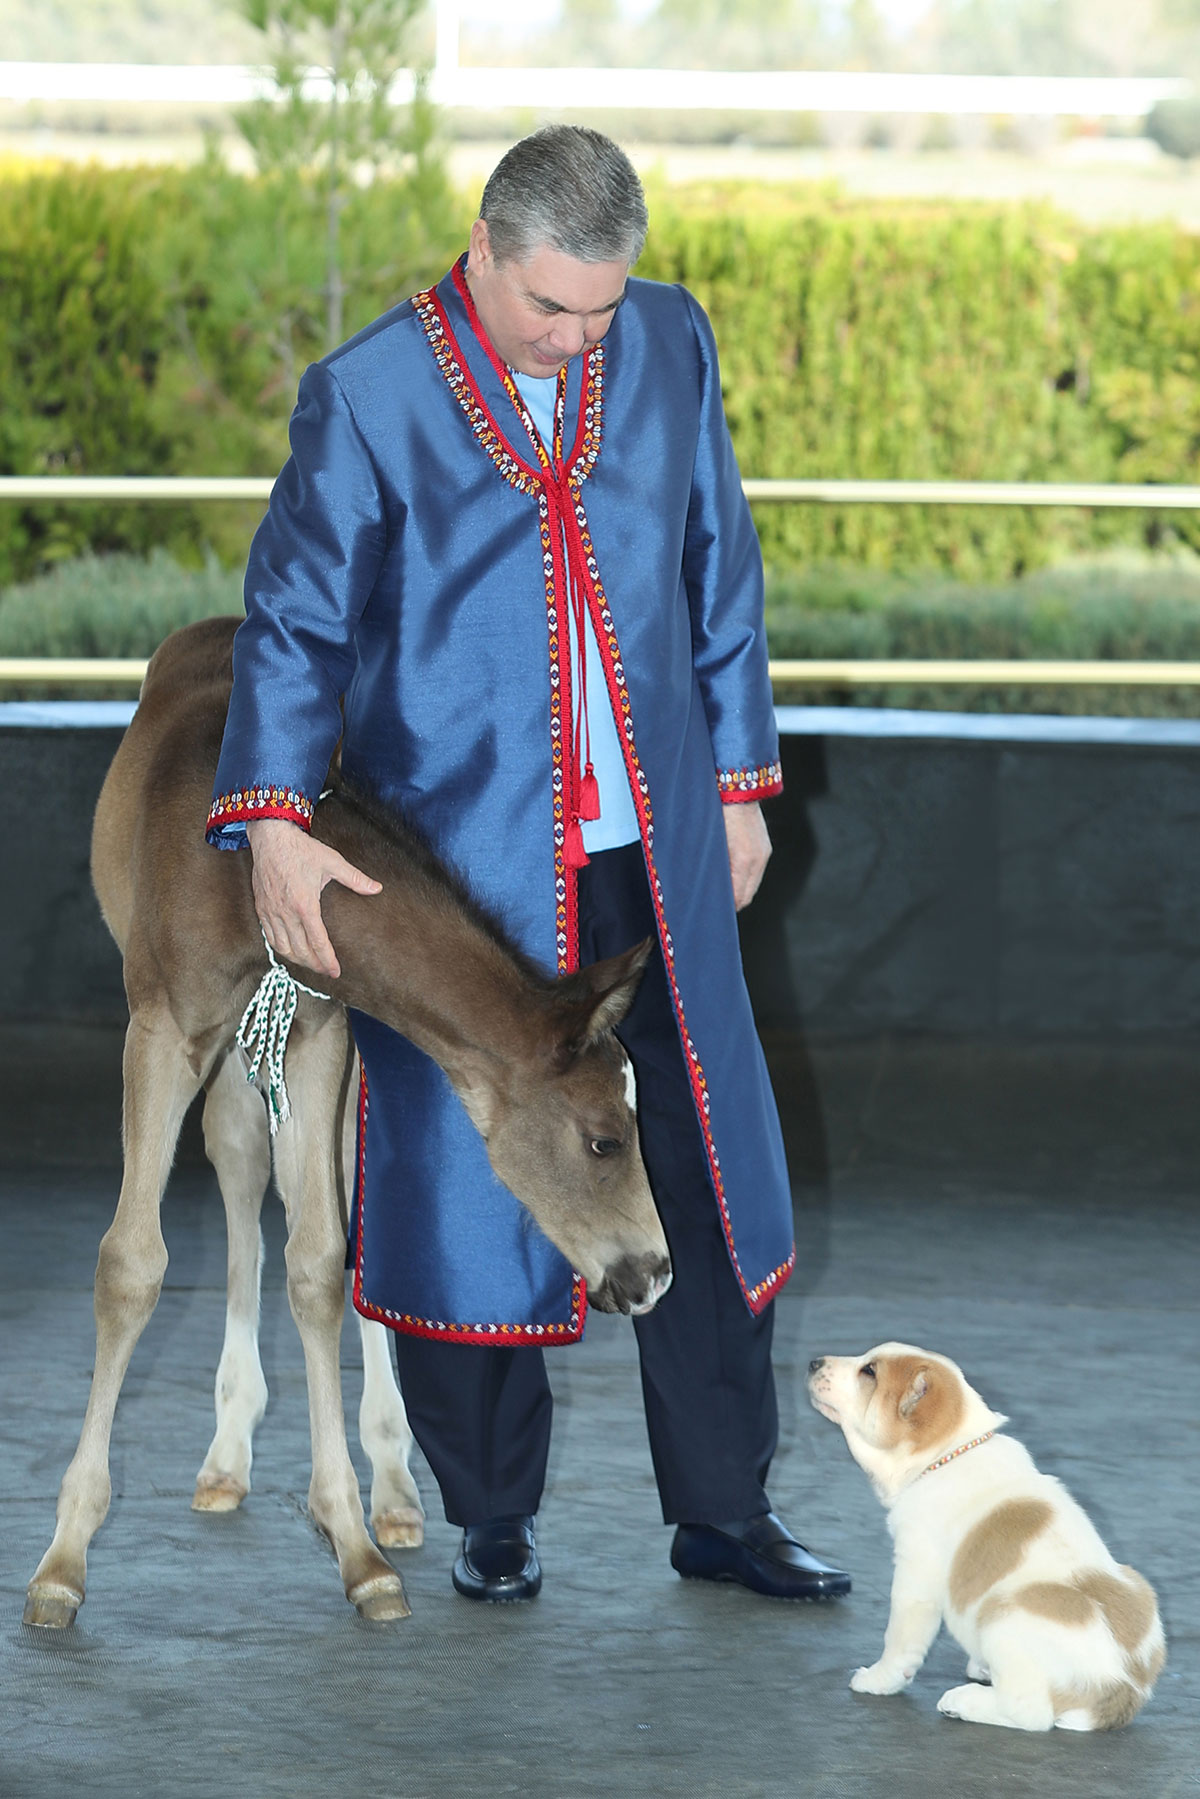 The leader of the nation visited the Akhal-Teke equestrian sports complex of the President of Turkmenistan